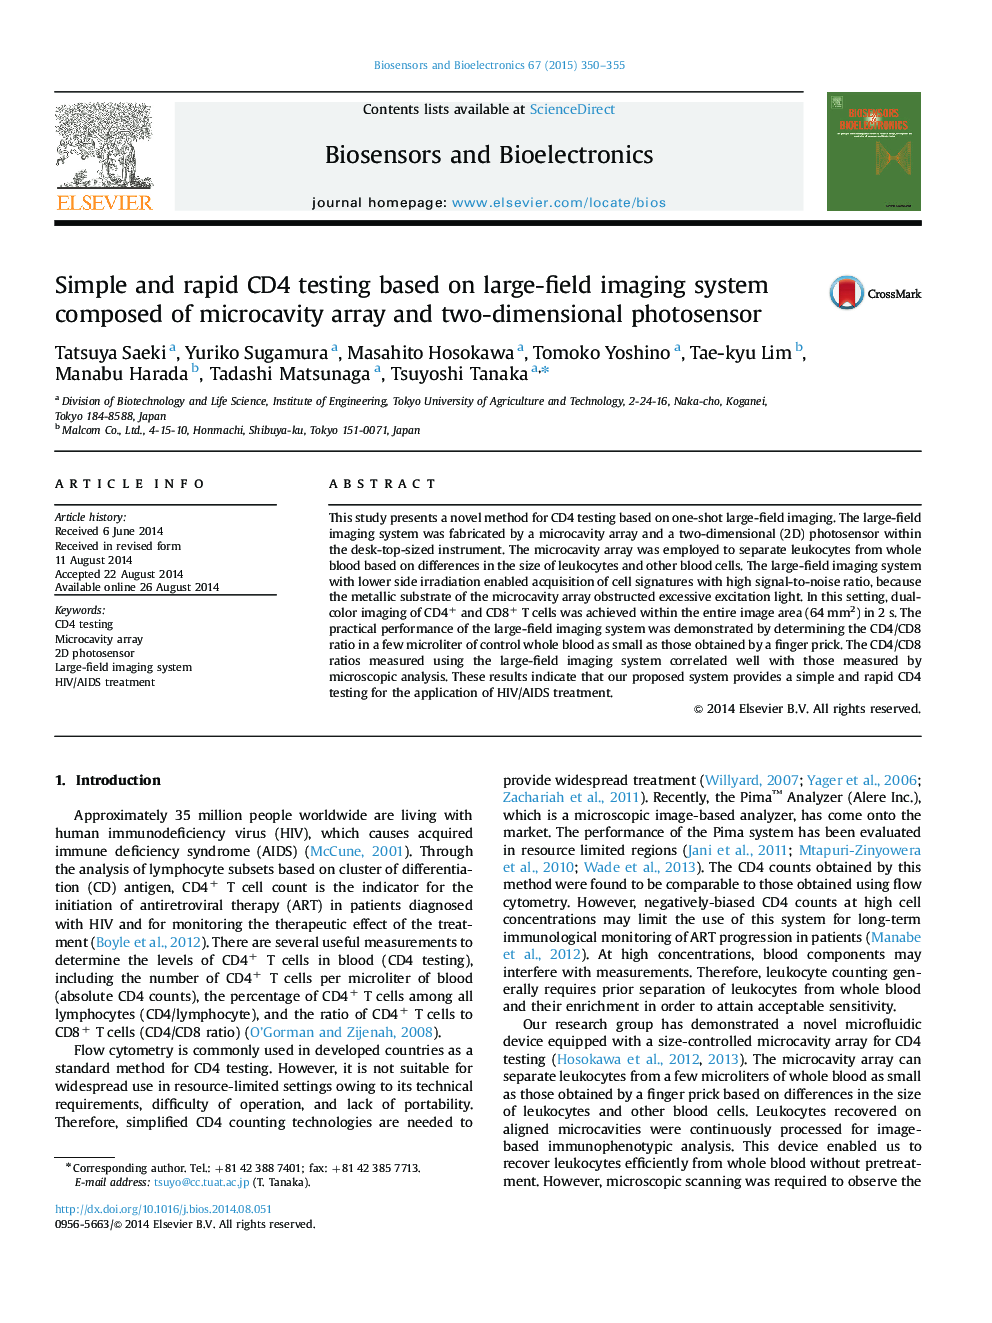 Simple and rapid CD4 testing based on large-field imaging system composed of microcavity array and two-dimensional photosensor